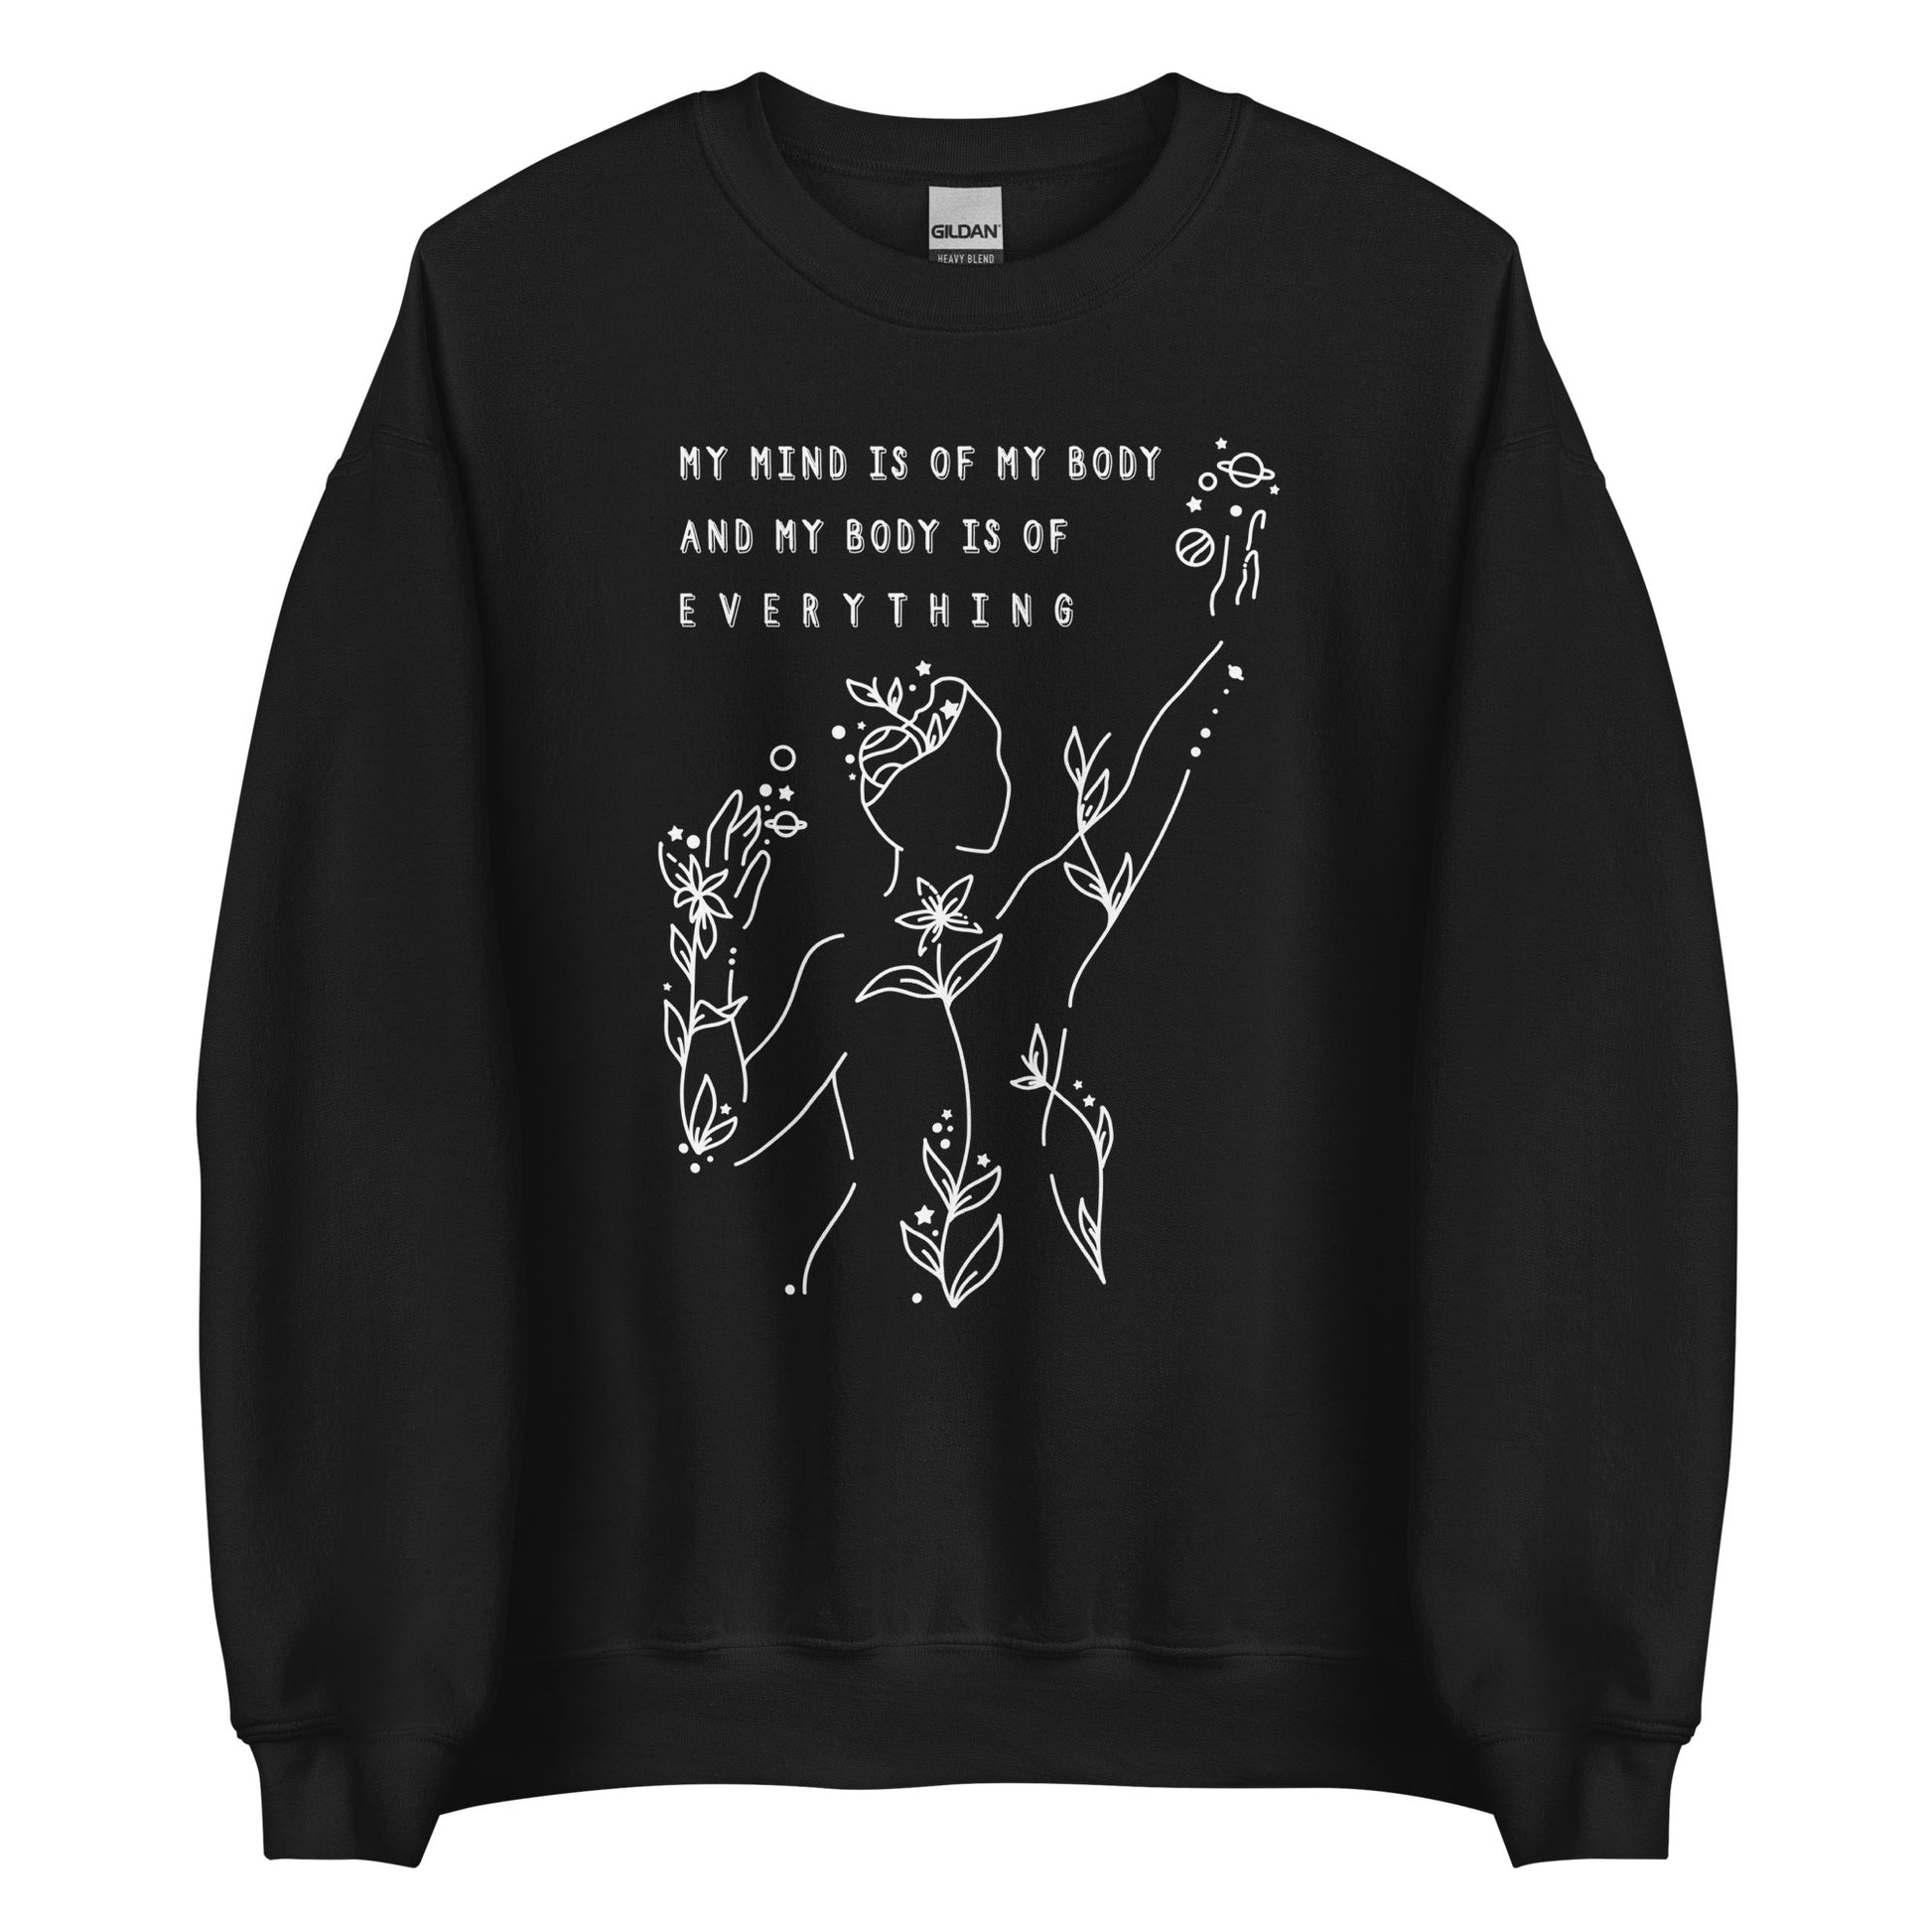 A black crewneck sweatshirt featuring an abstract illustration of a figure whose body is spreading out into plants and planets and stars. Text above the figure reads "My mind is of my body and my body is of everything."